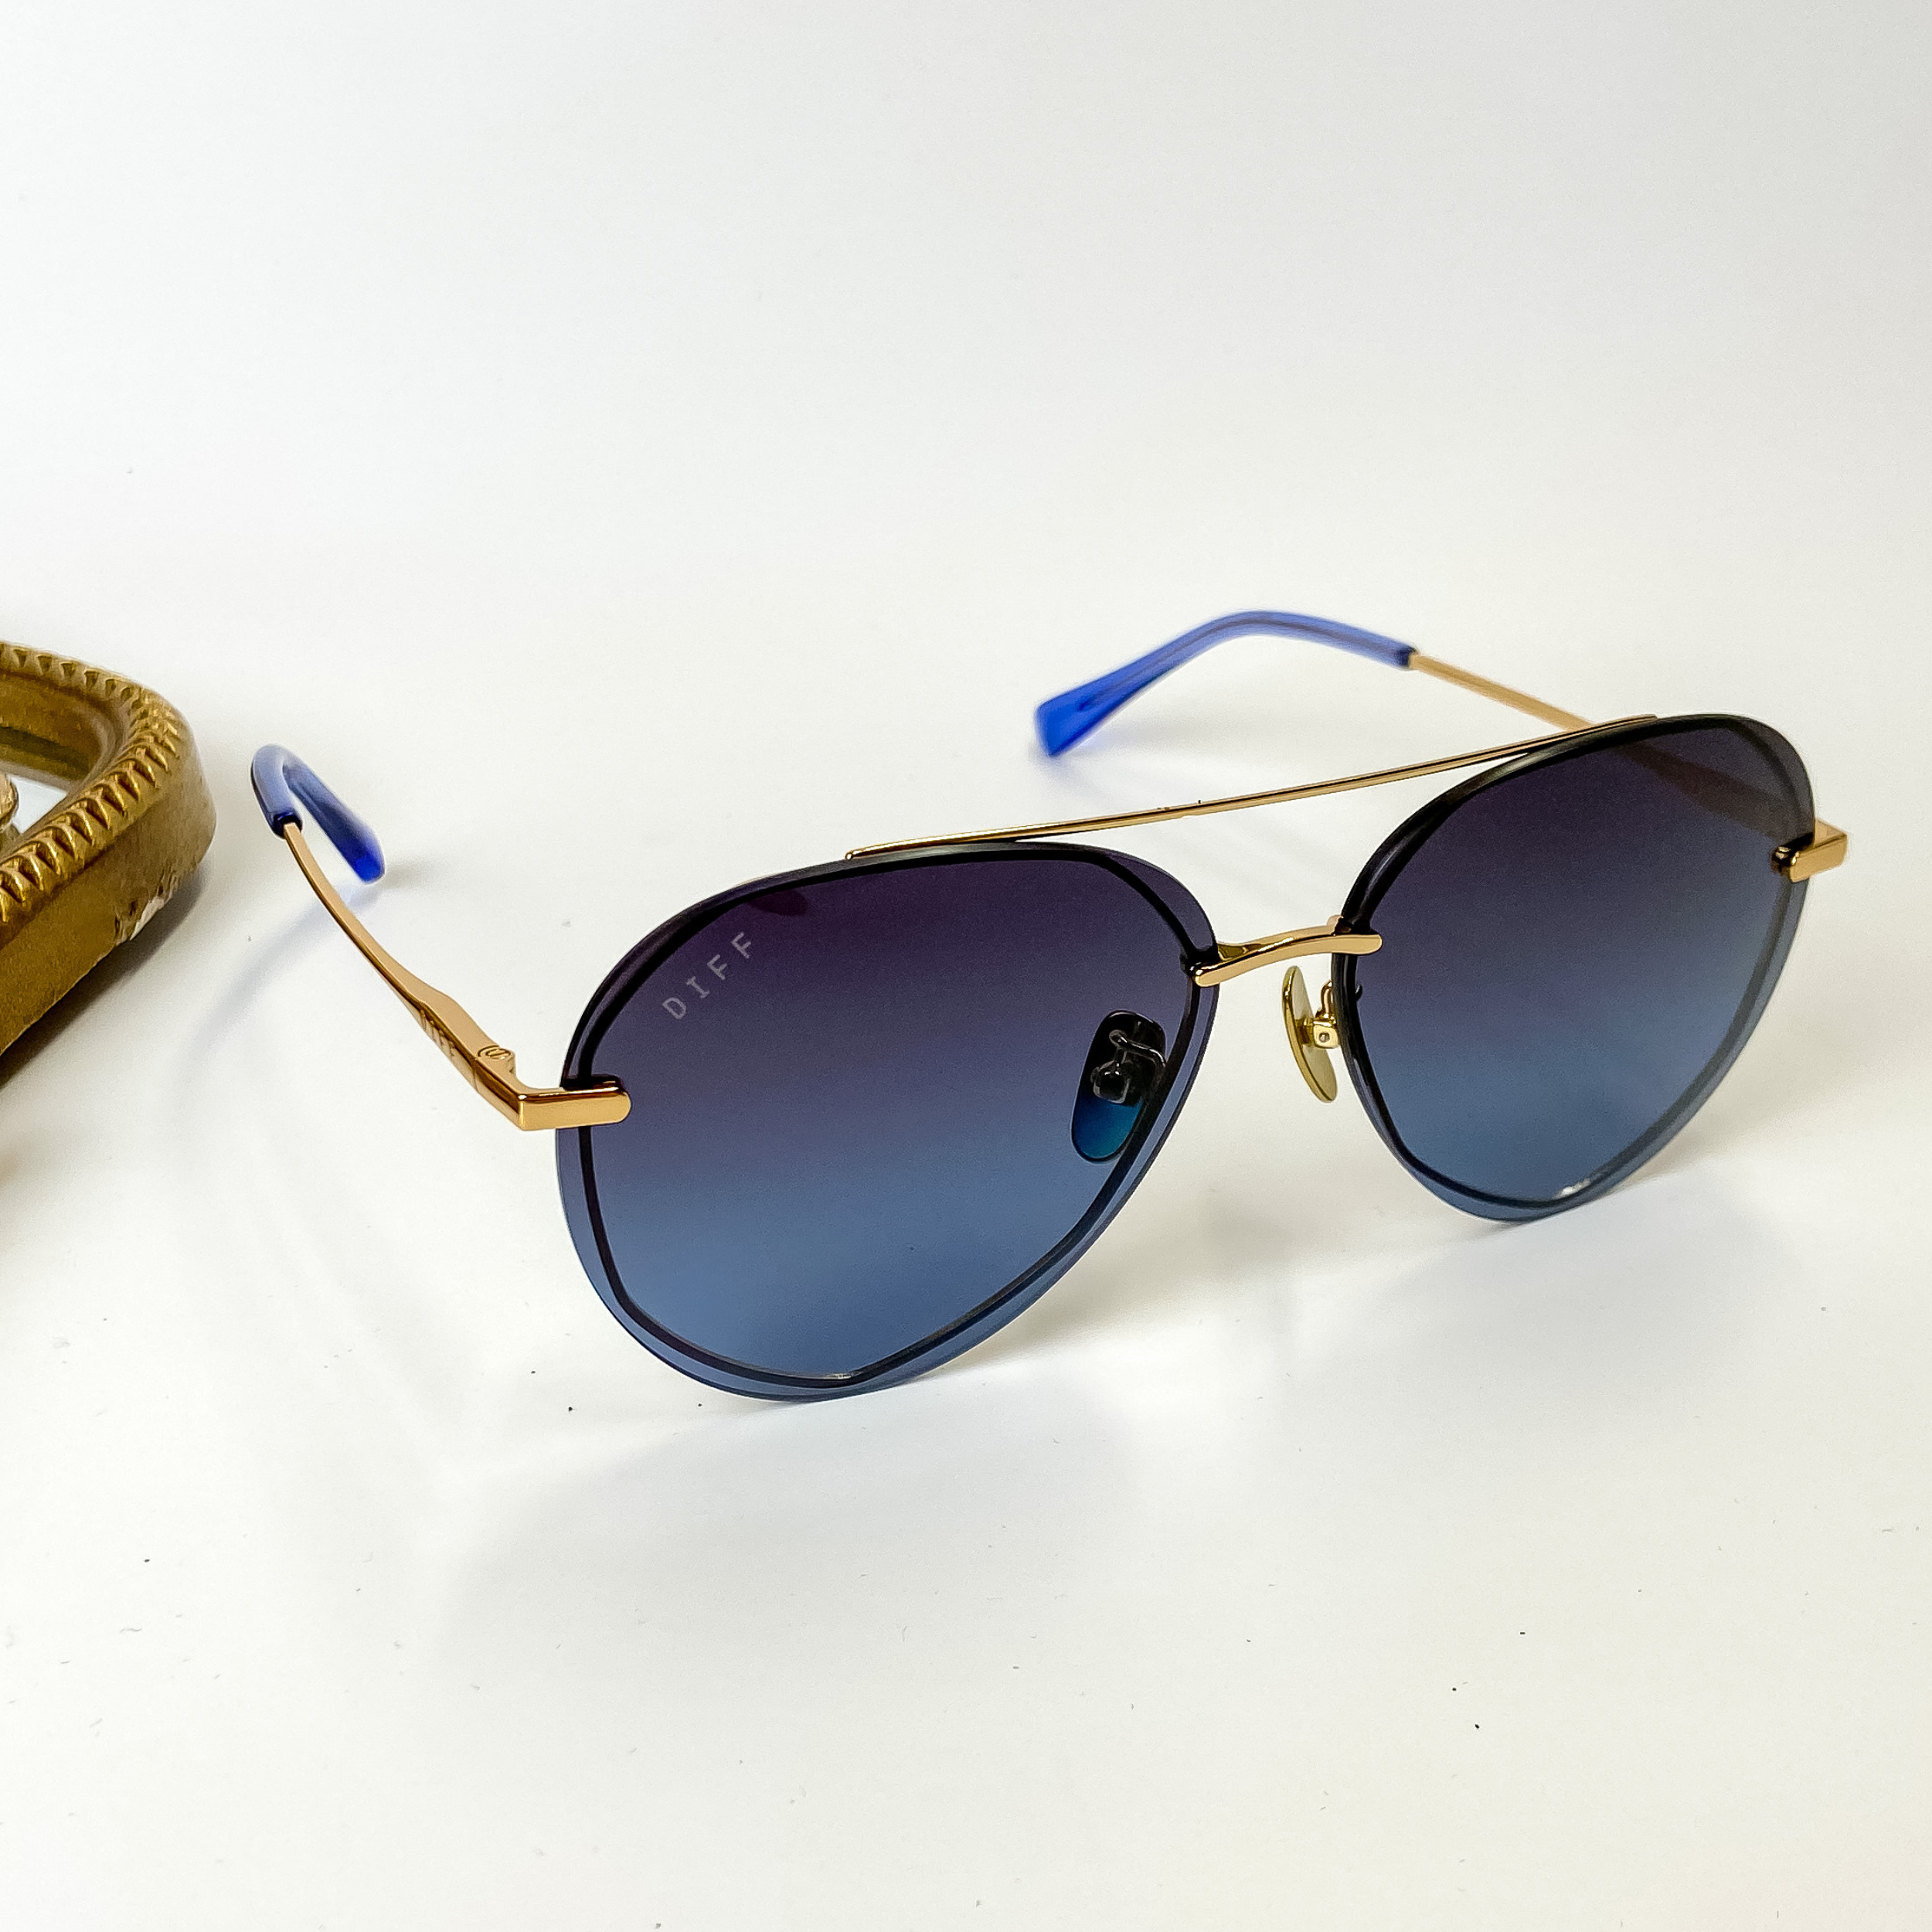 A pair of gold tone aviator style sunglasses with blue lenses. Pictured on a white background with gold jewelry.